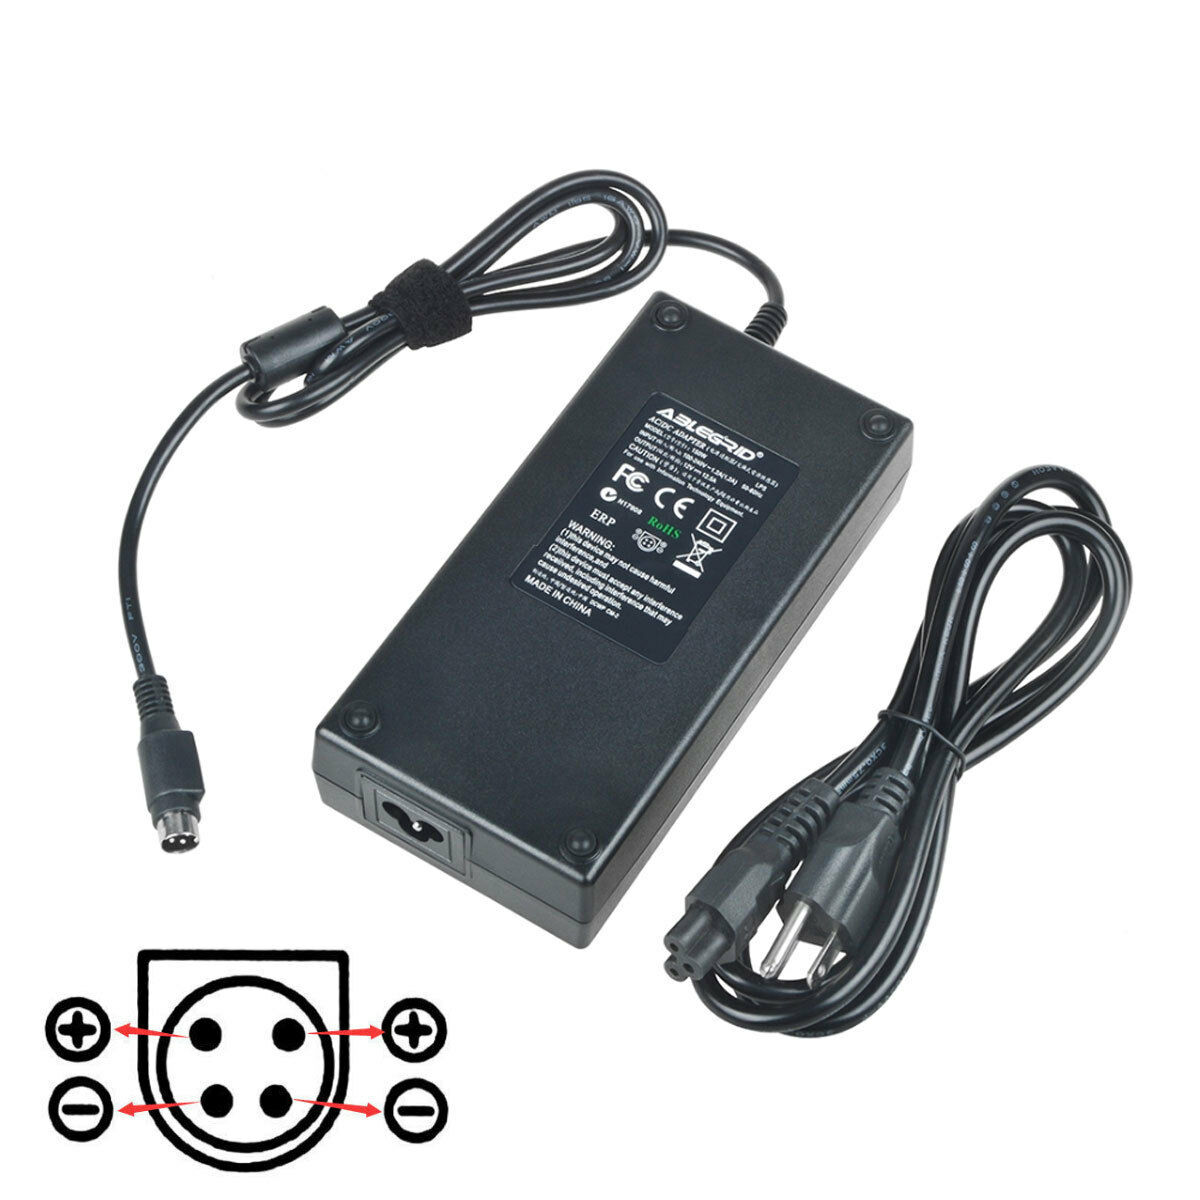 4-Pin AC Adapter Charger for Dell FSP150-AHAN1 LCD 9NA1350204 Power Cord Mains Construction: 100% B